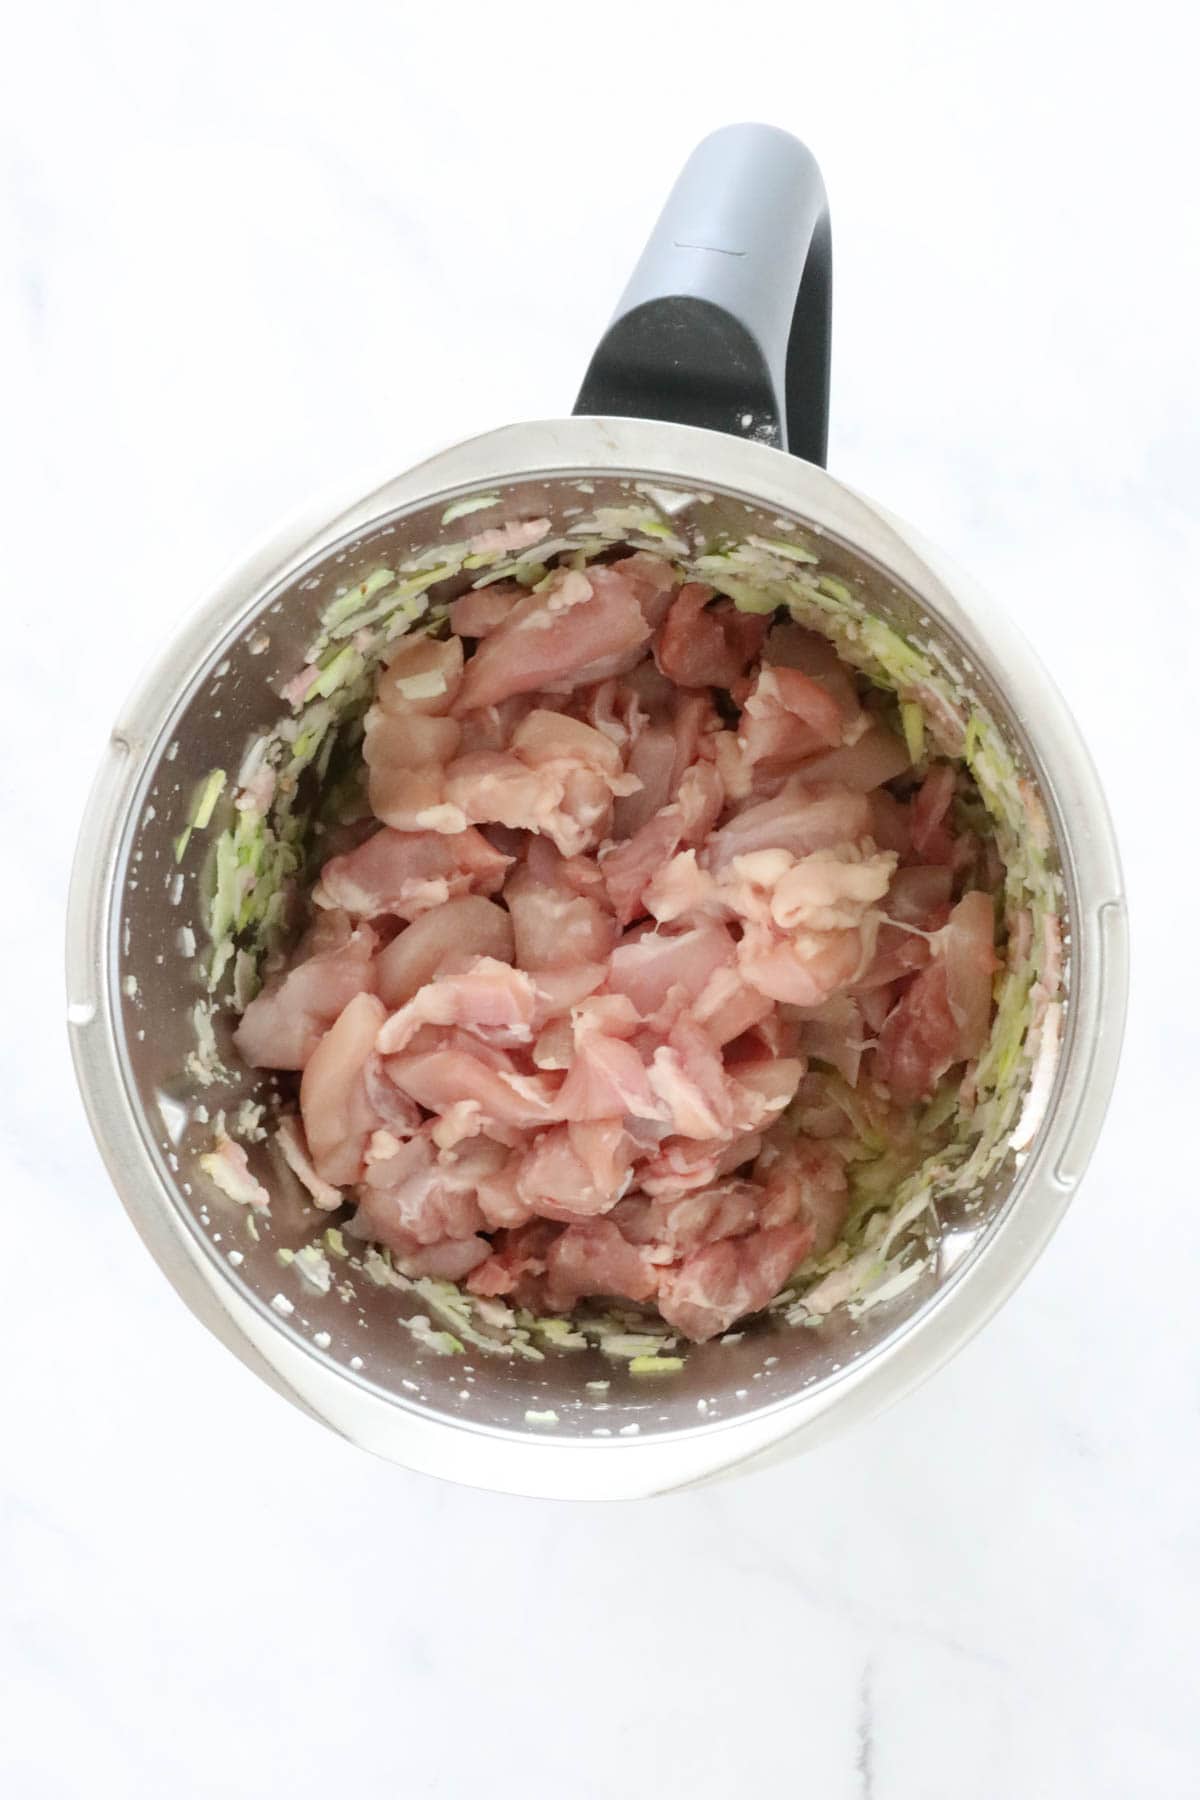 Raw chicken in a Thermomix.